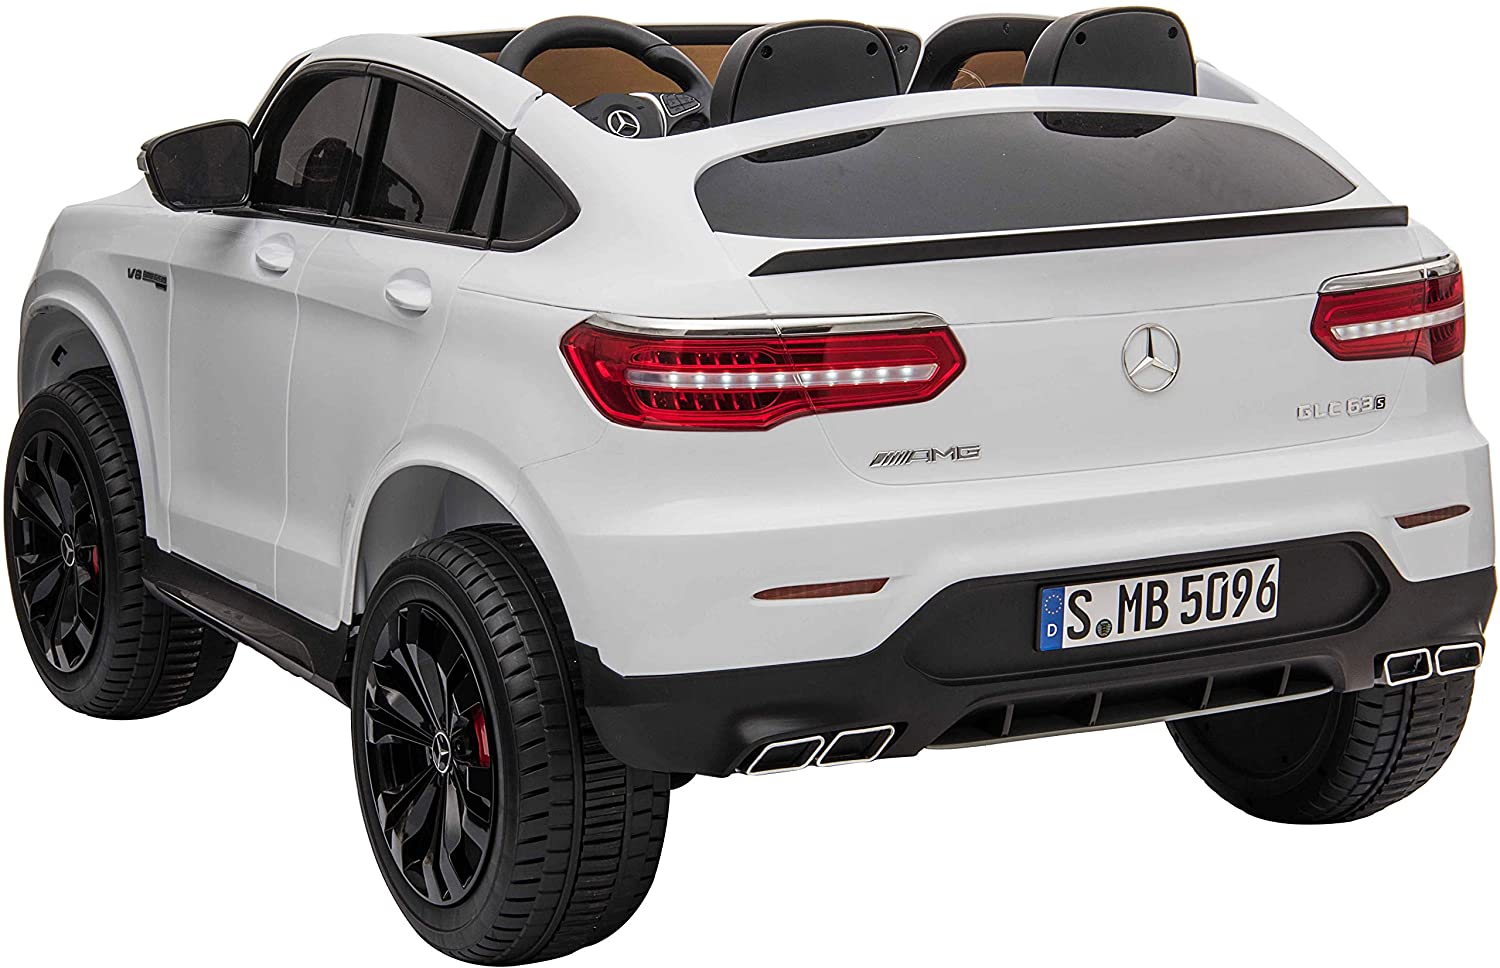 "White Mercedes AMG GLC63 S Coupe 2 Seater Kids Car, Electric Ride-on Toy, Emanating Luxury and Performance."